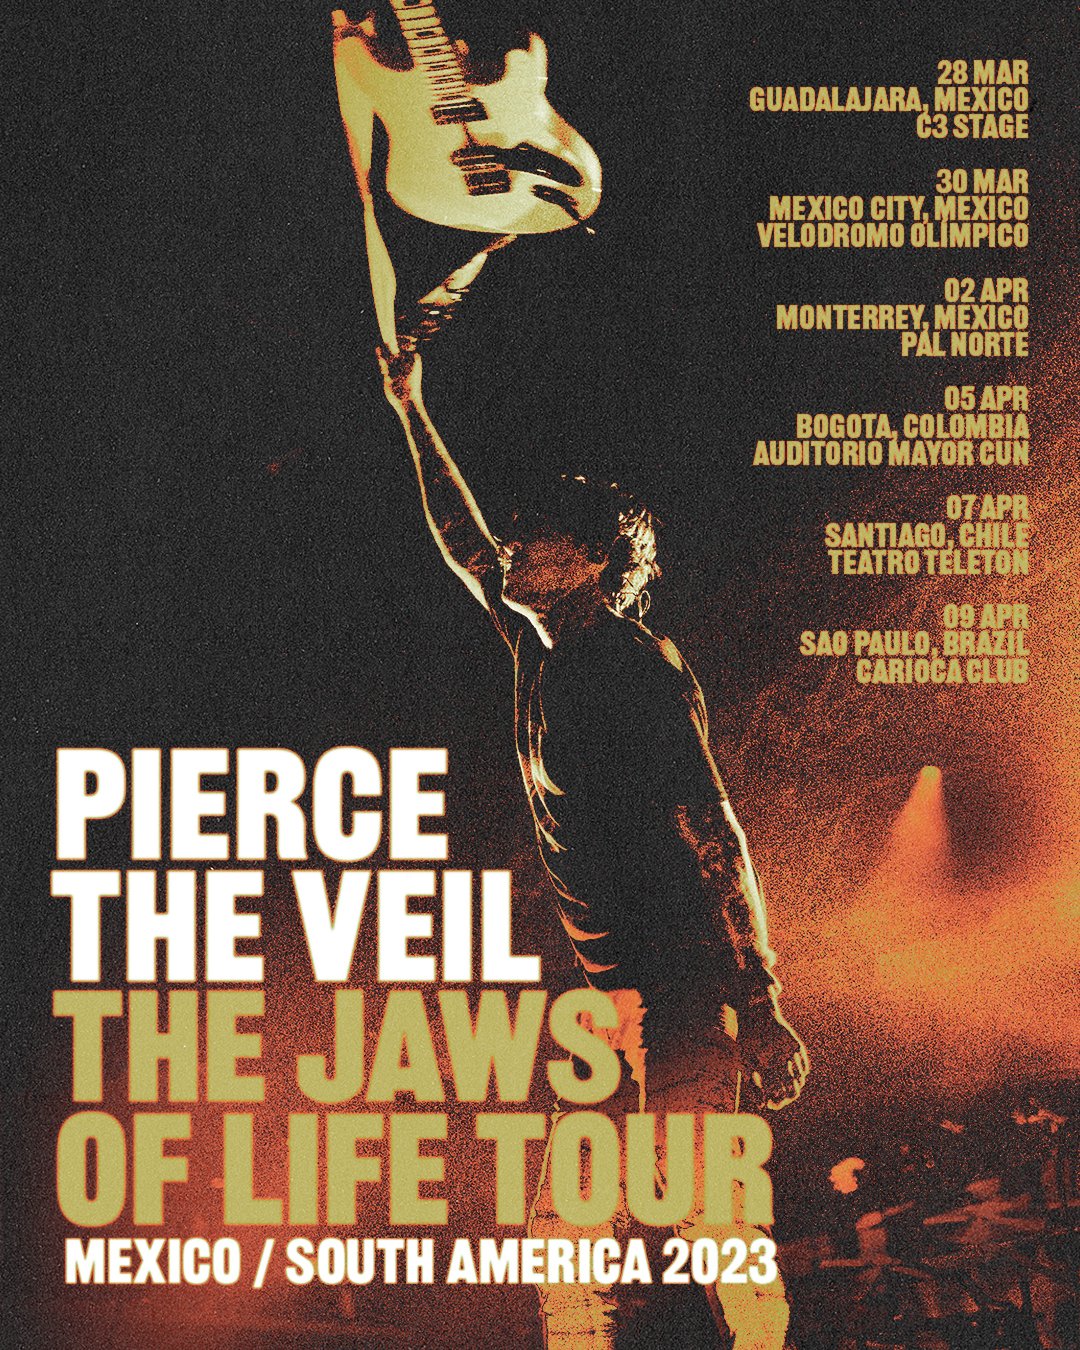 Pierce The Veil on Twitter "We've seen you, we've heard you, and now